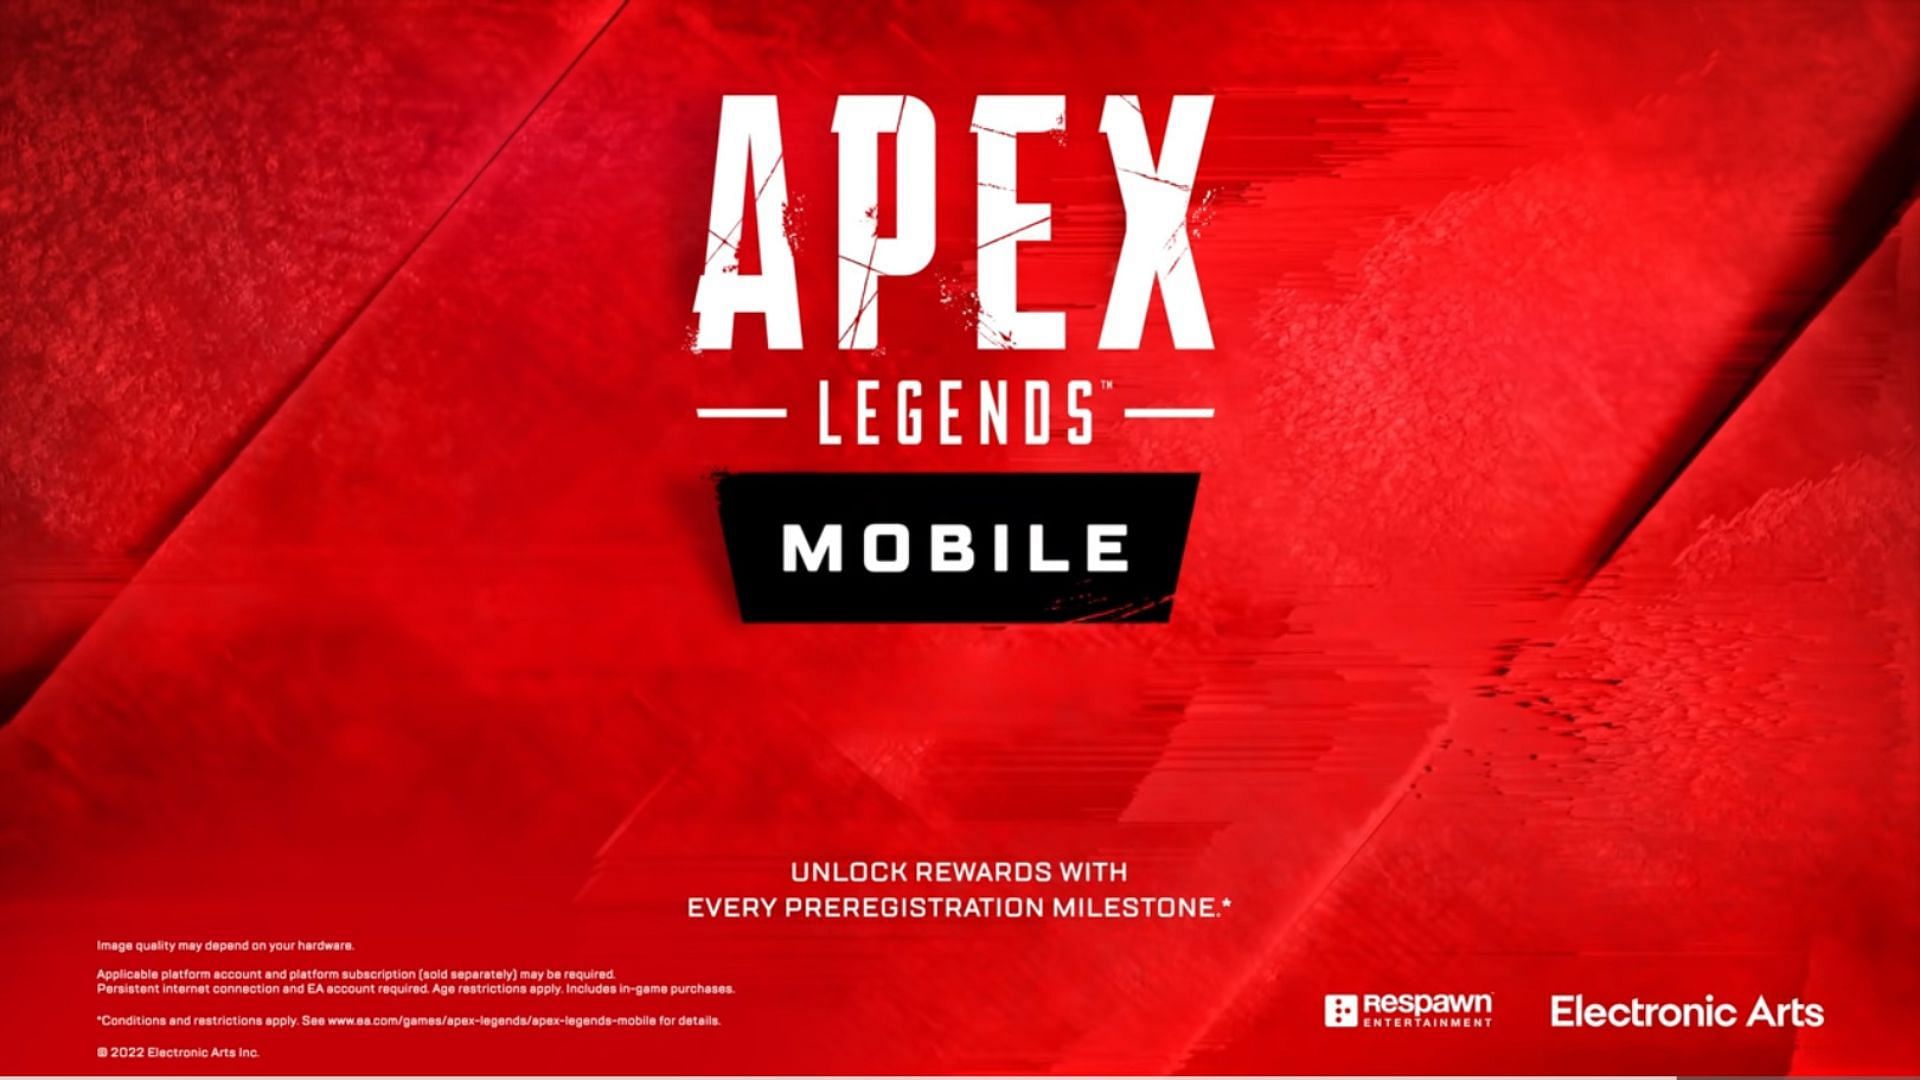 Apex Legends Mobile Shutting Down By May 2023